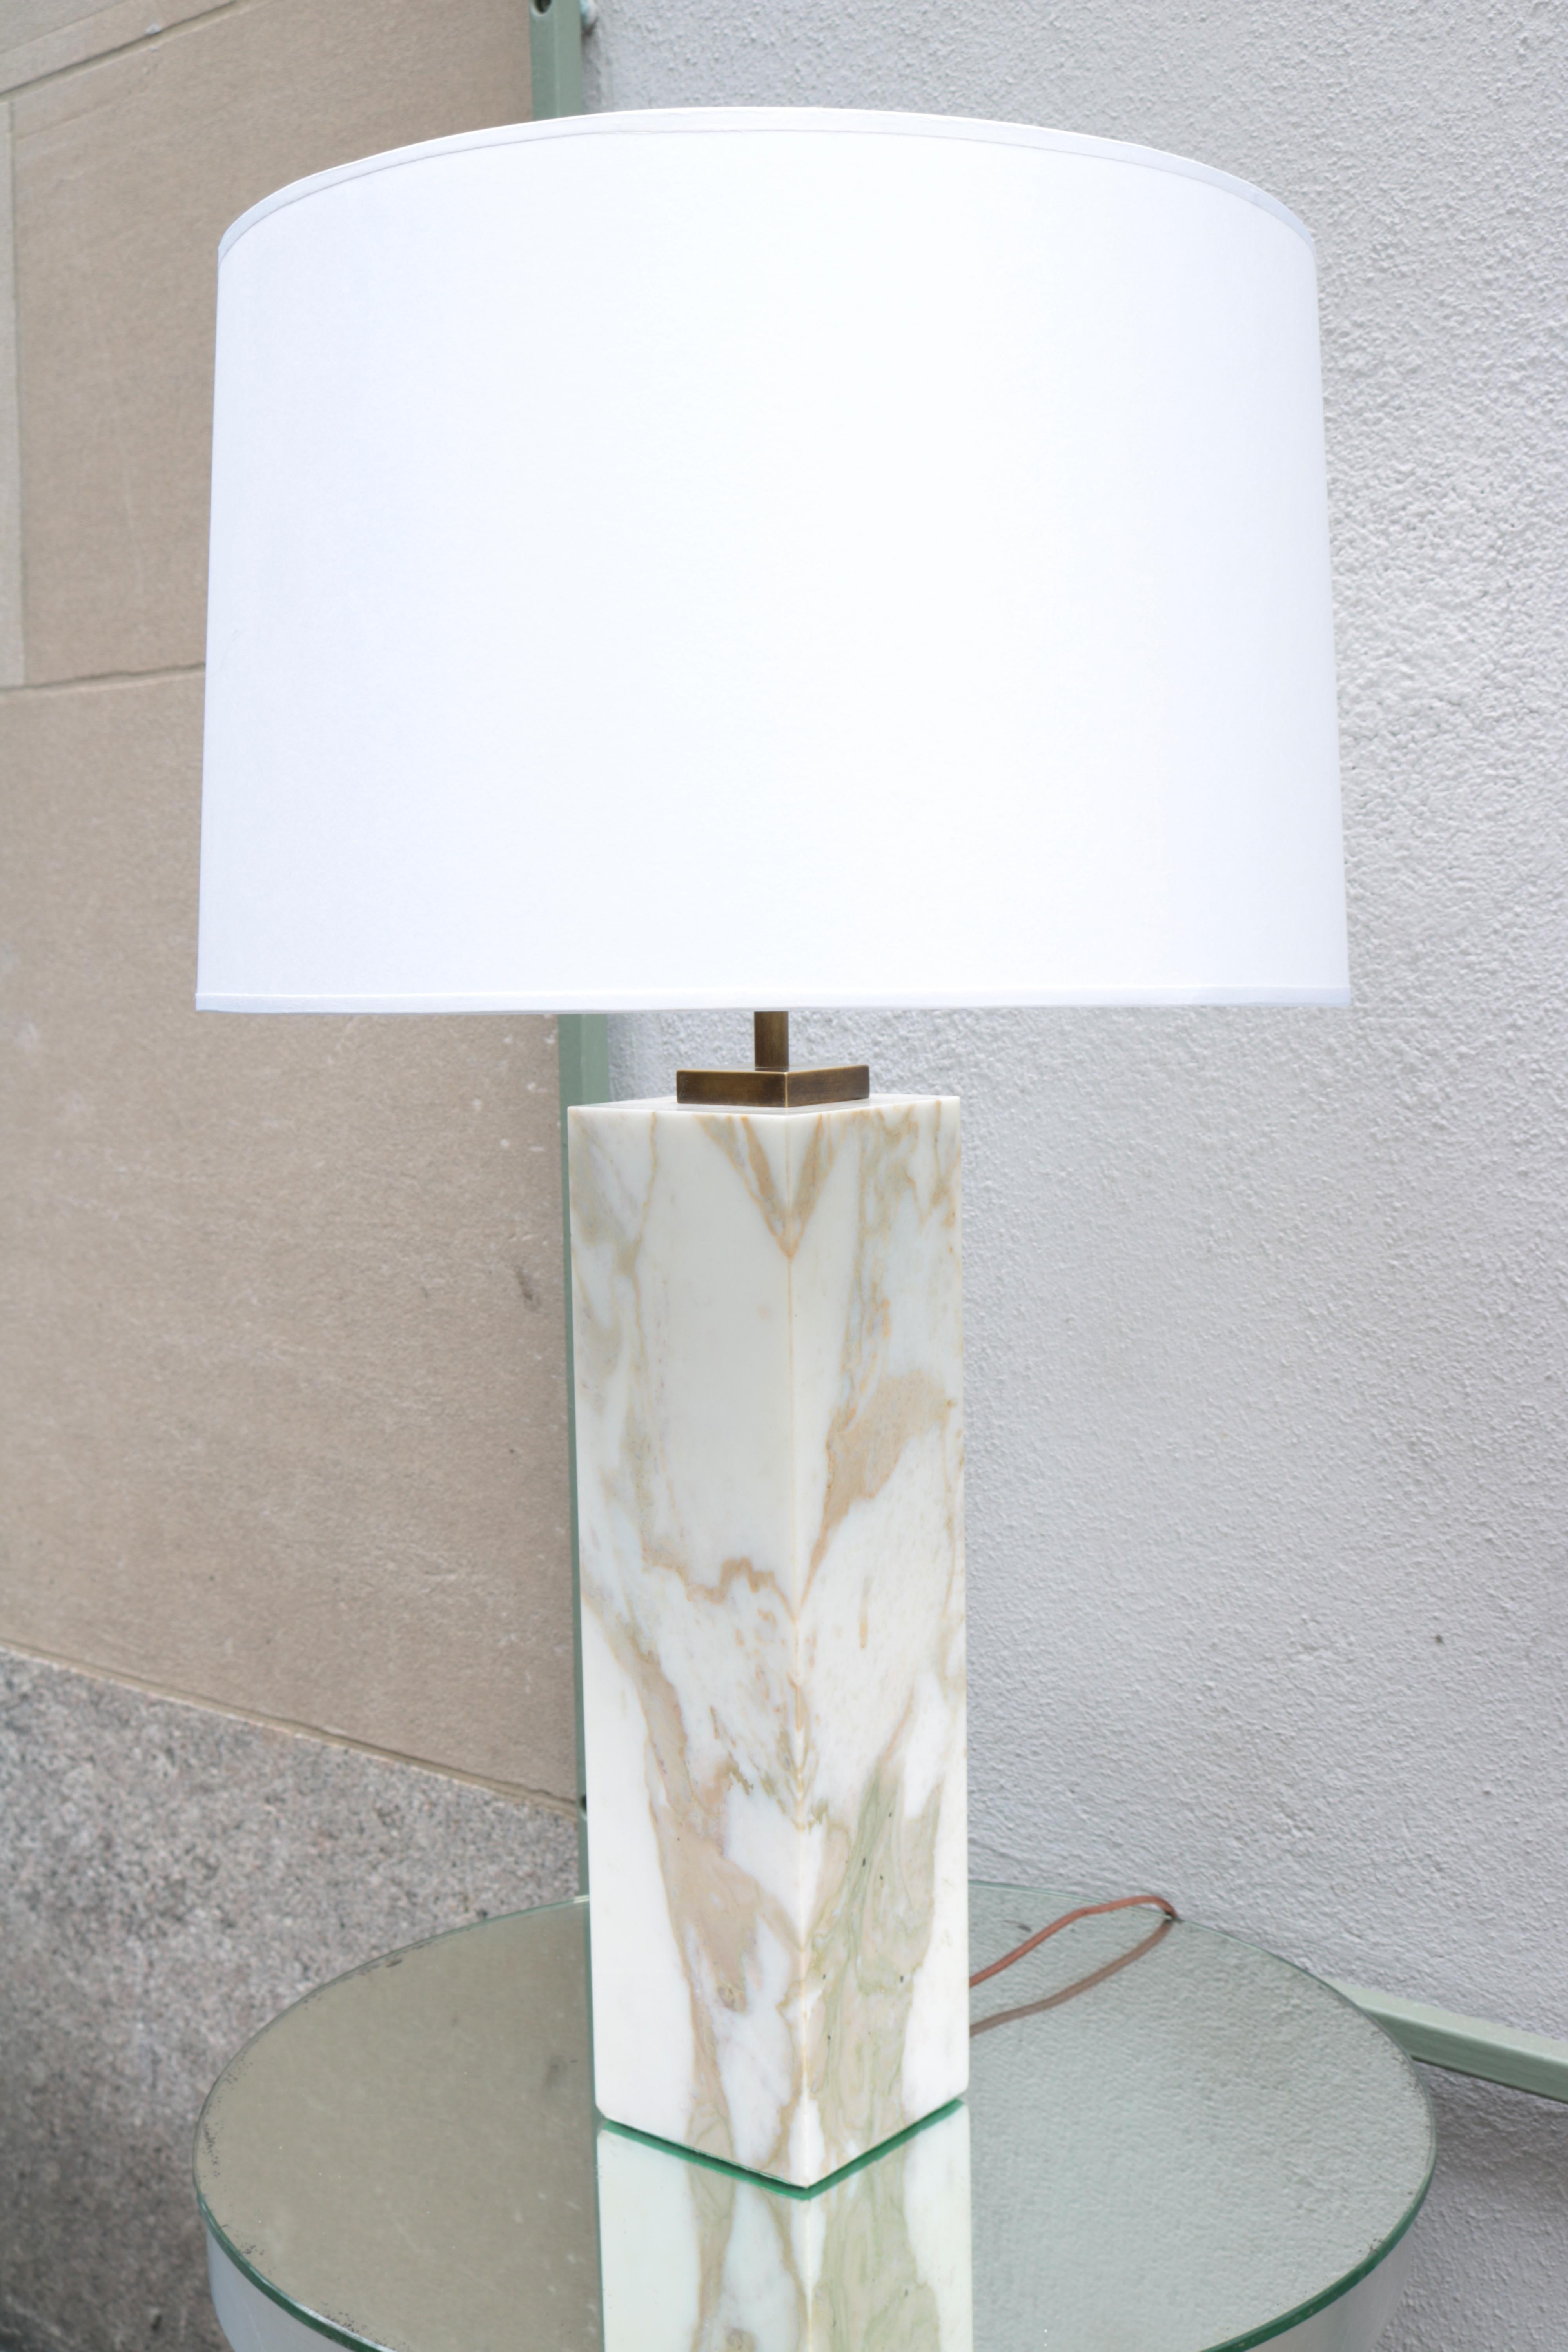 A single modernist marble table lamp
Designed by T.H. Robsjohn-Gibbings for Hansen.
Polished marble and patinated brass.
 